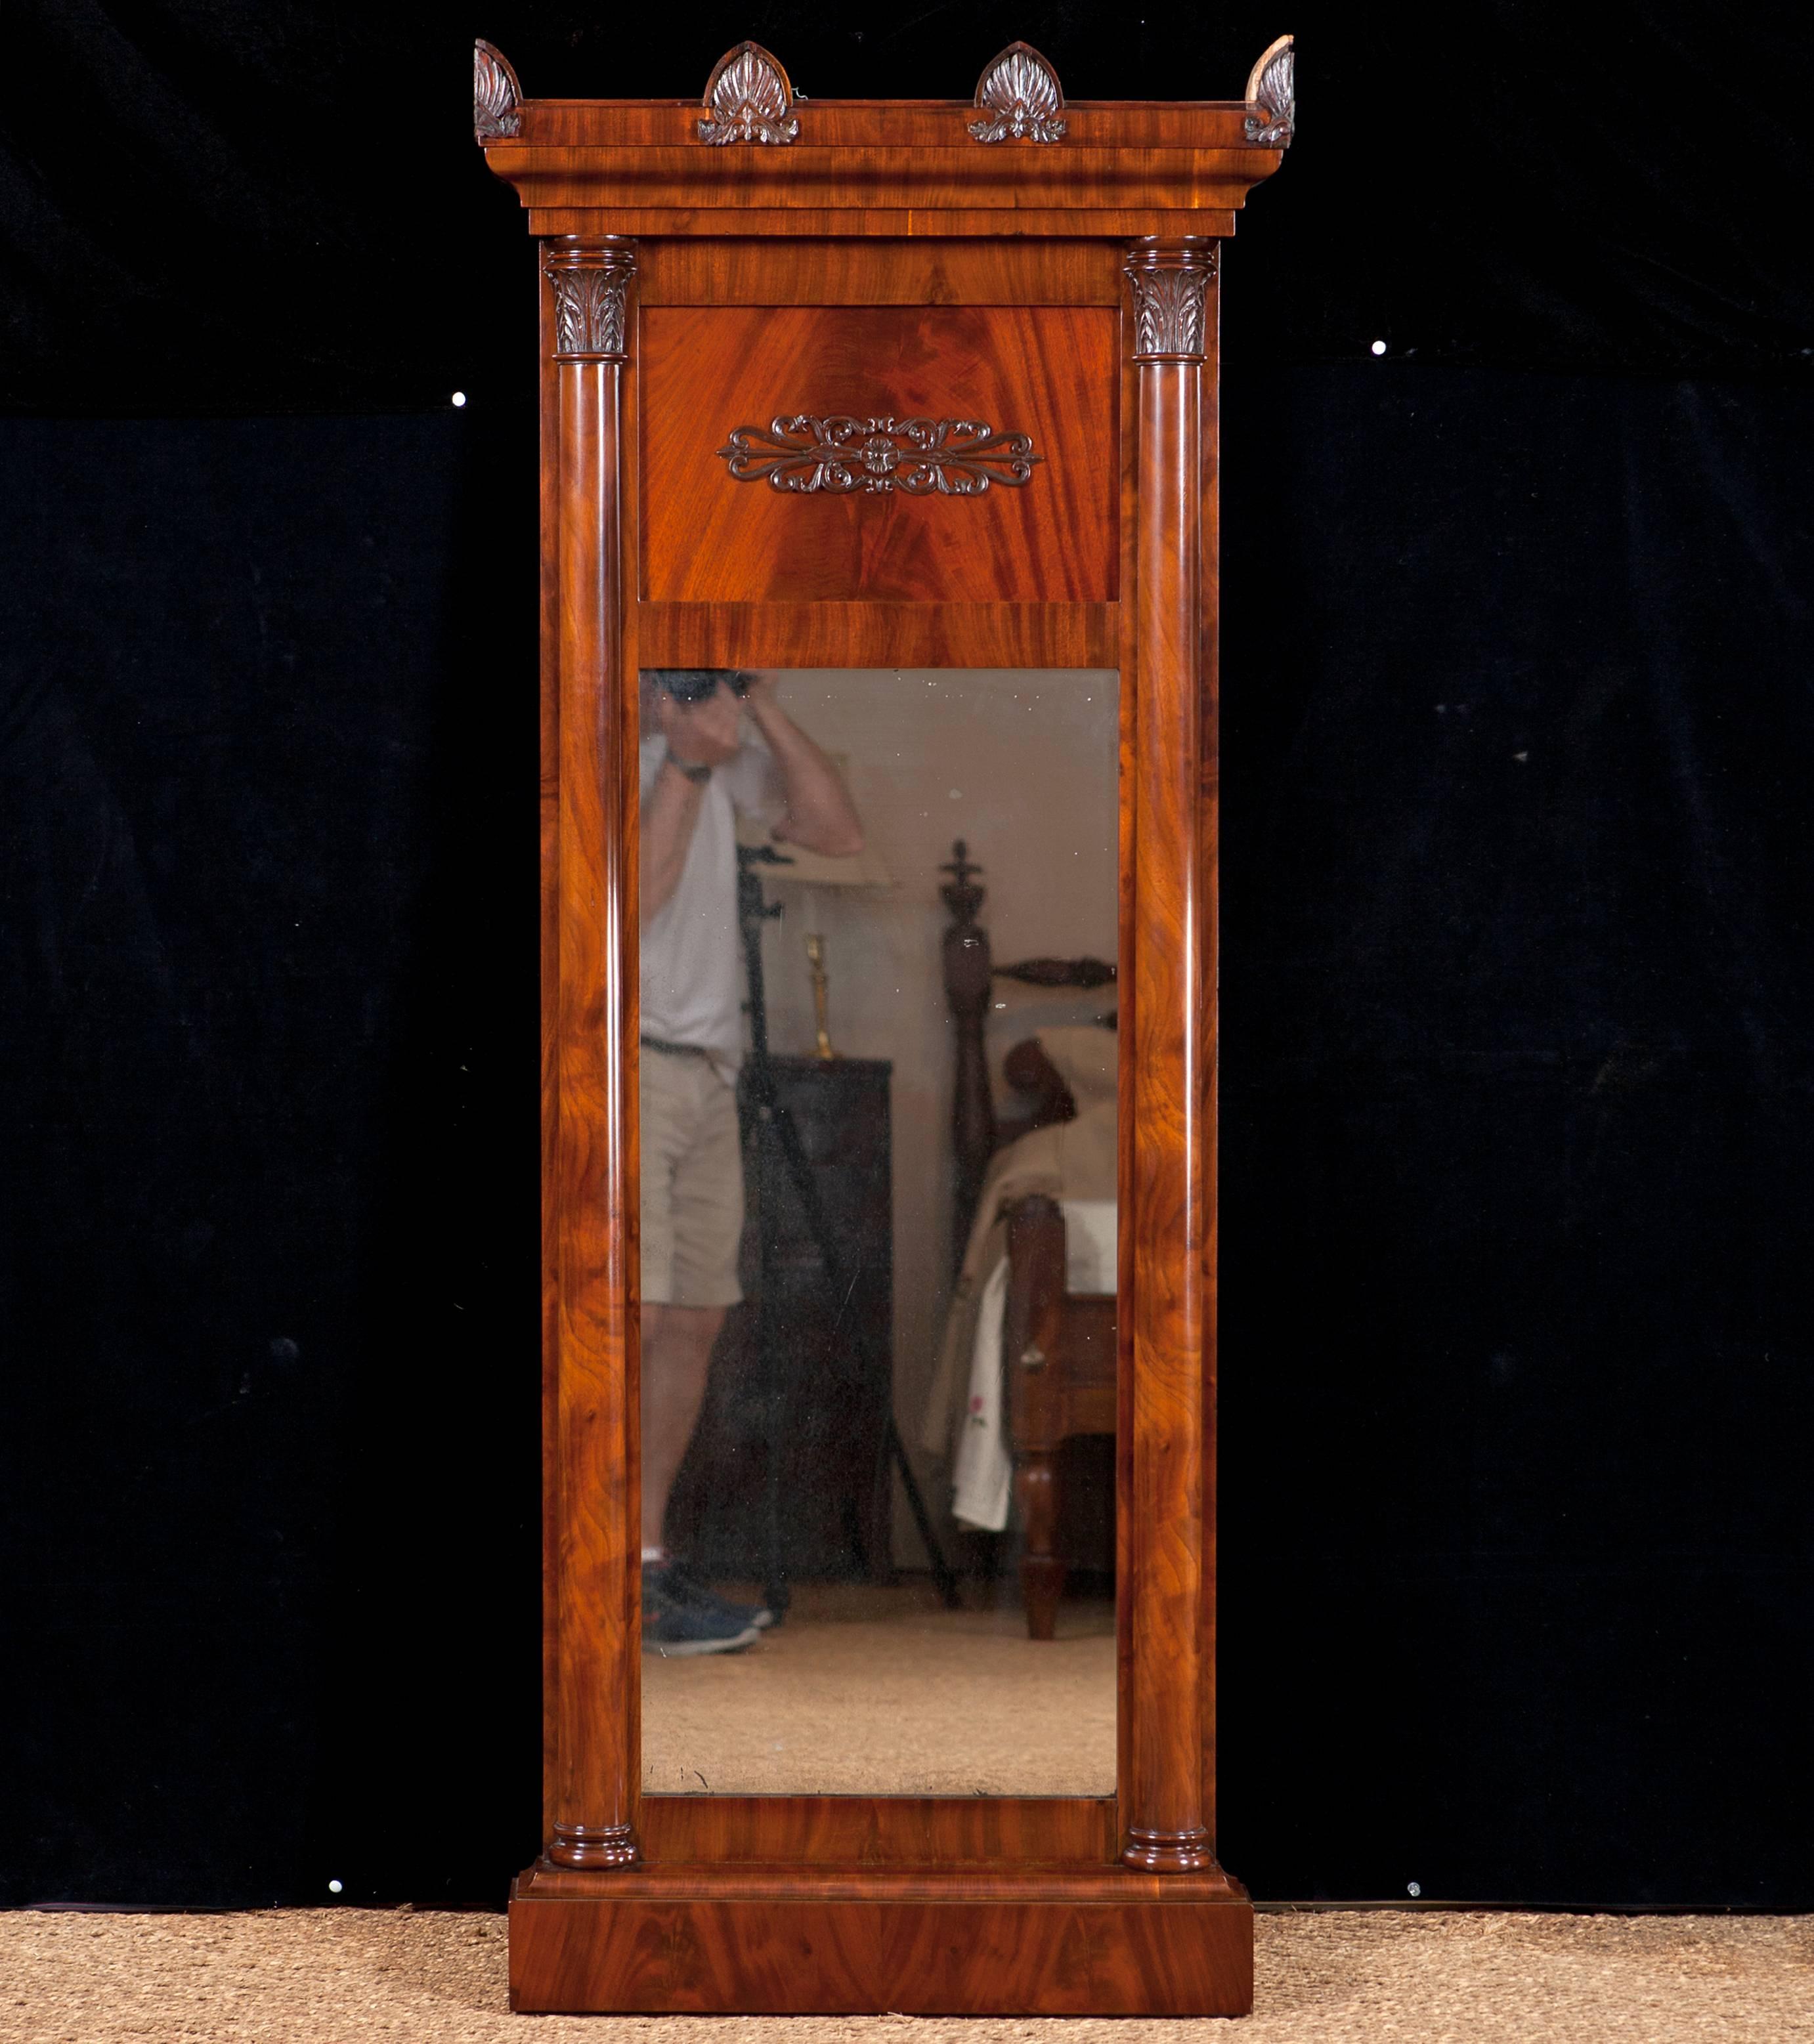 Danish Large Empire Mirror in Cuban Mahogany with Columns and Carved Capitals, c. 1810 For Sale